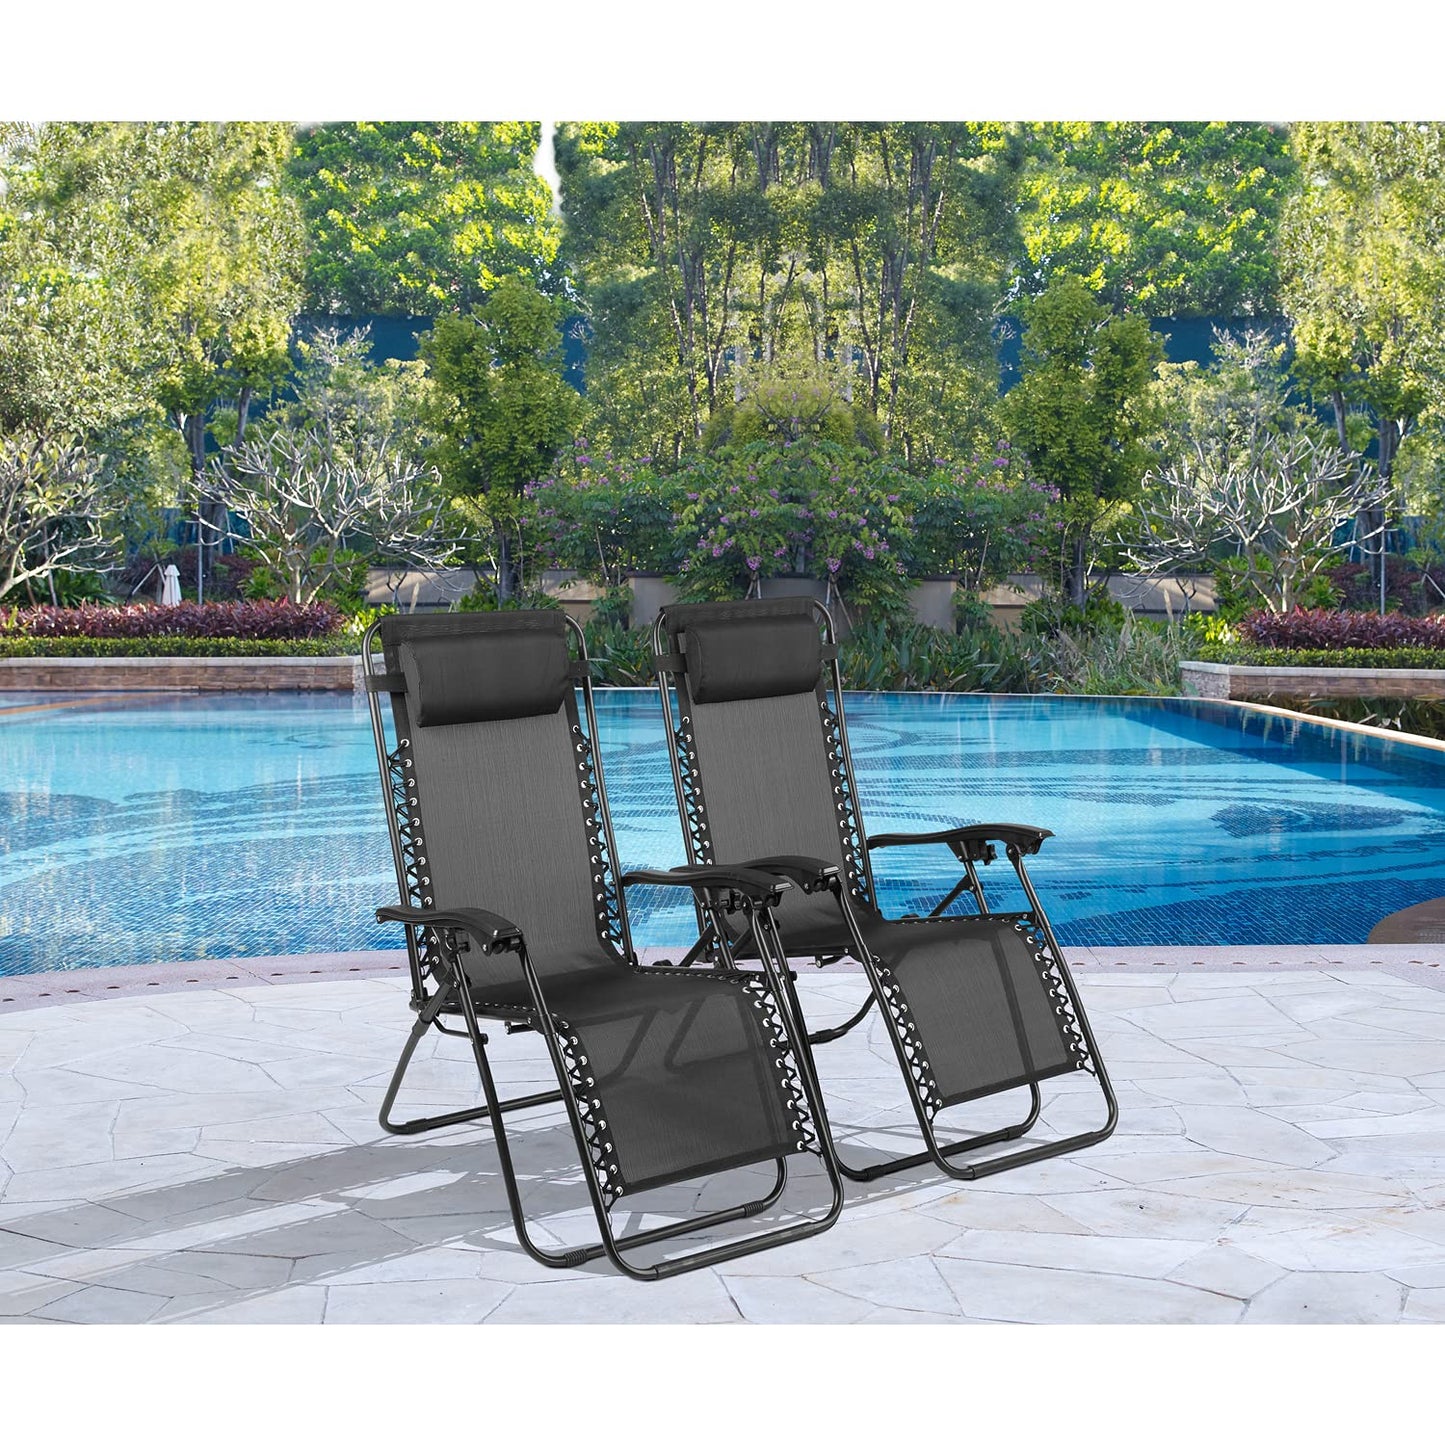 Zero Gravity Chairs Set of 2 Pool Lounge Chair Zero Gravity Recliner Zero Gravity Lounge Chair Antigravity Chairs Anti Gravity Chair Folding Reclining Camping Chair with Headrest by Naomi Home - Black Modern